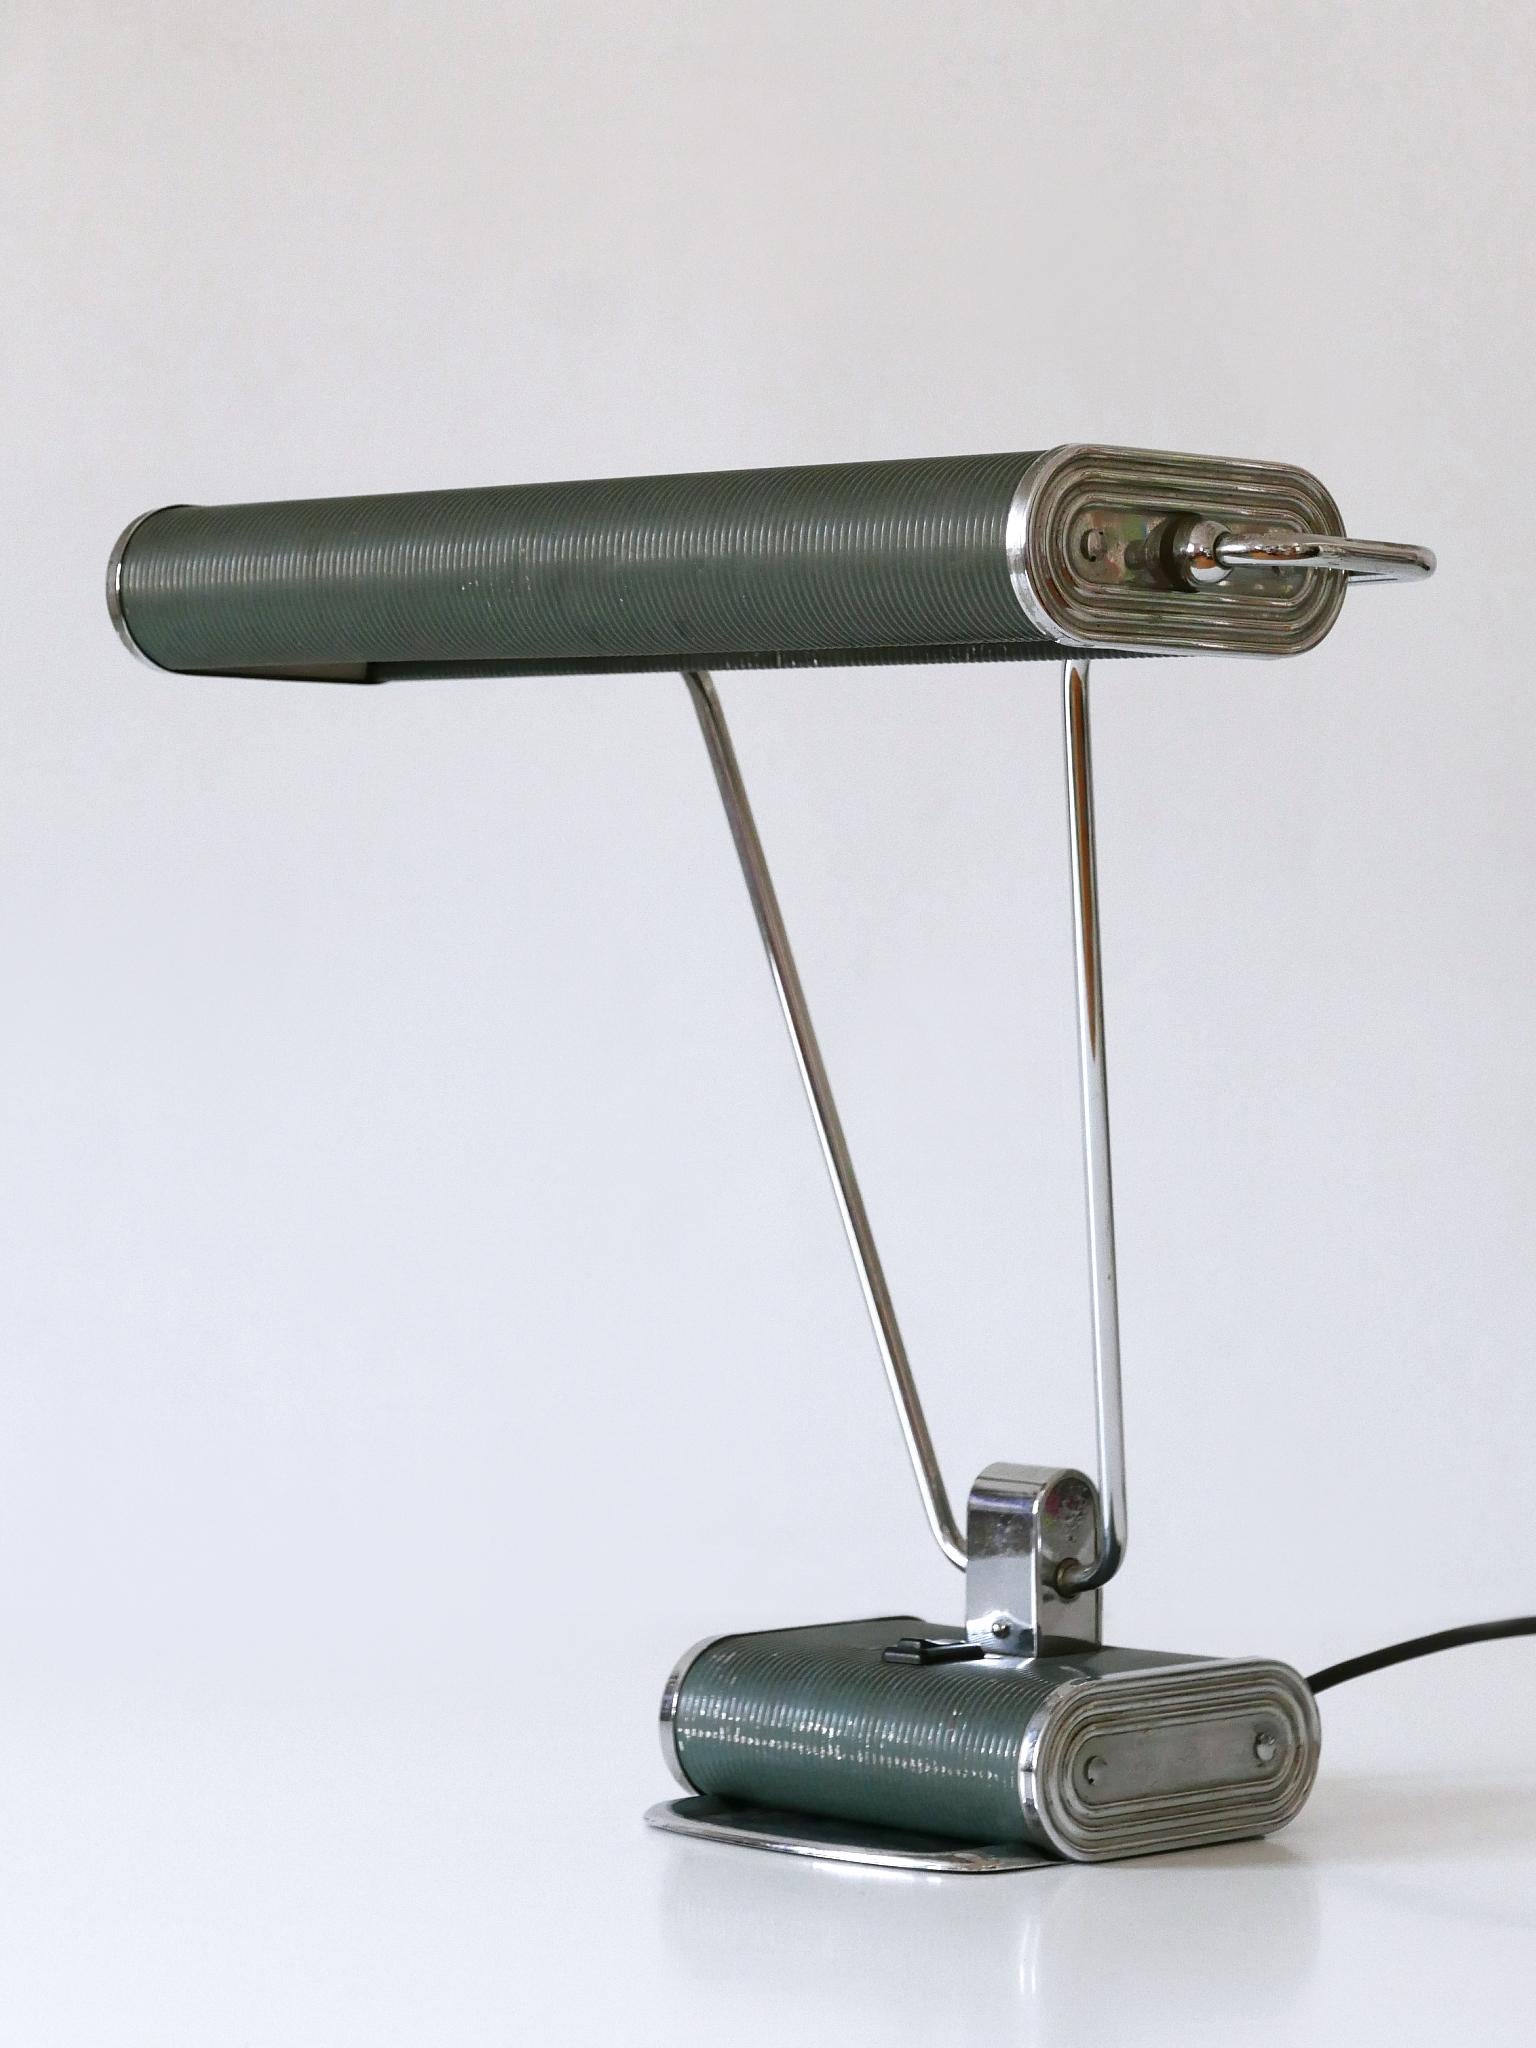 Elegant Art Deco table lamp or desk light 'No 71' in blue-gray and silver color. Lamp shade rotating. Designed by André Mounique for Jumo, France, 1930s.

A total of 5 lamps in two colors available!
This is the number 5 of the five desk lights. The